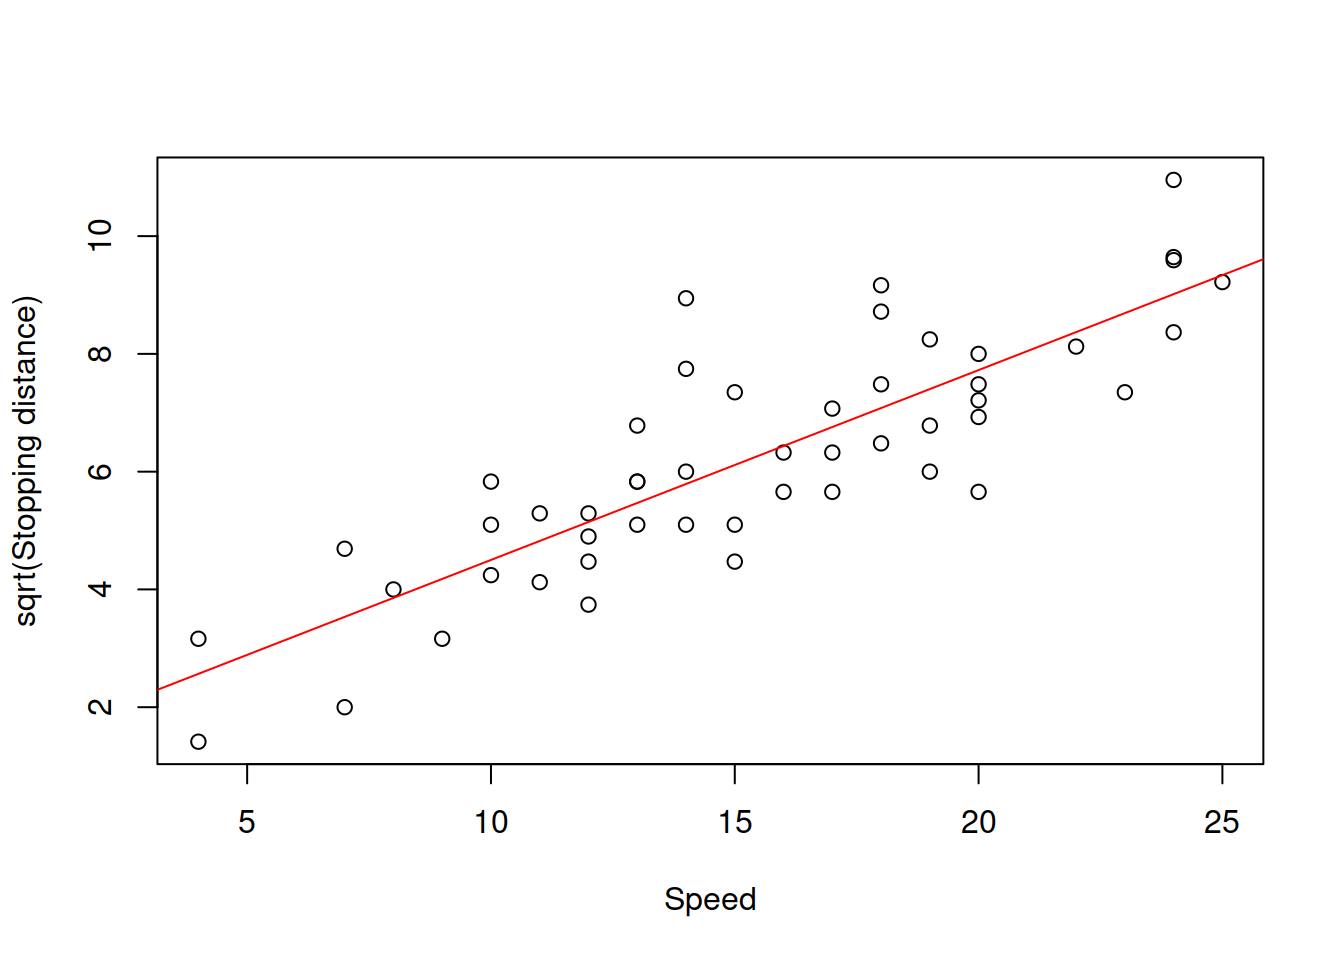 Speed vs square root of stopping distance.